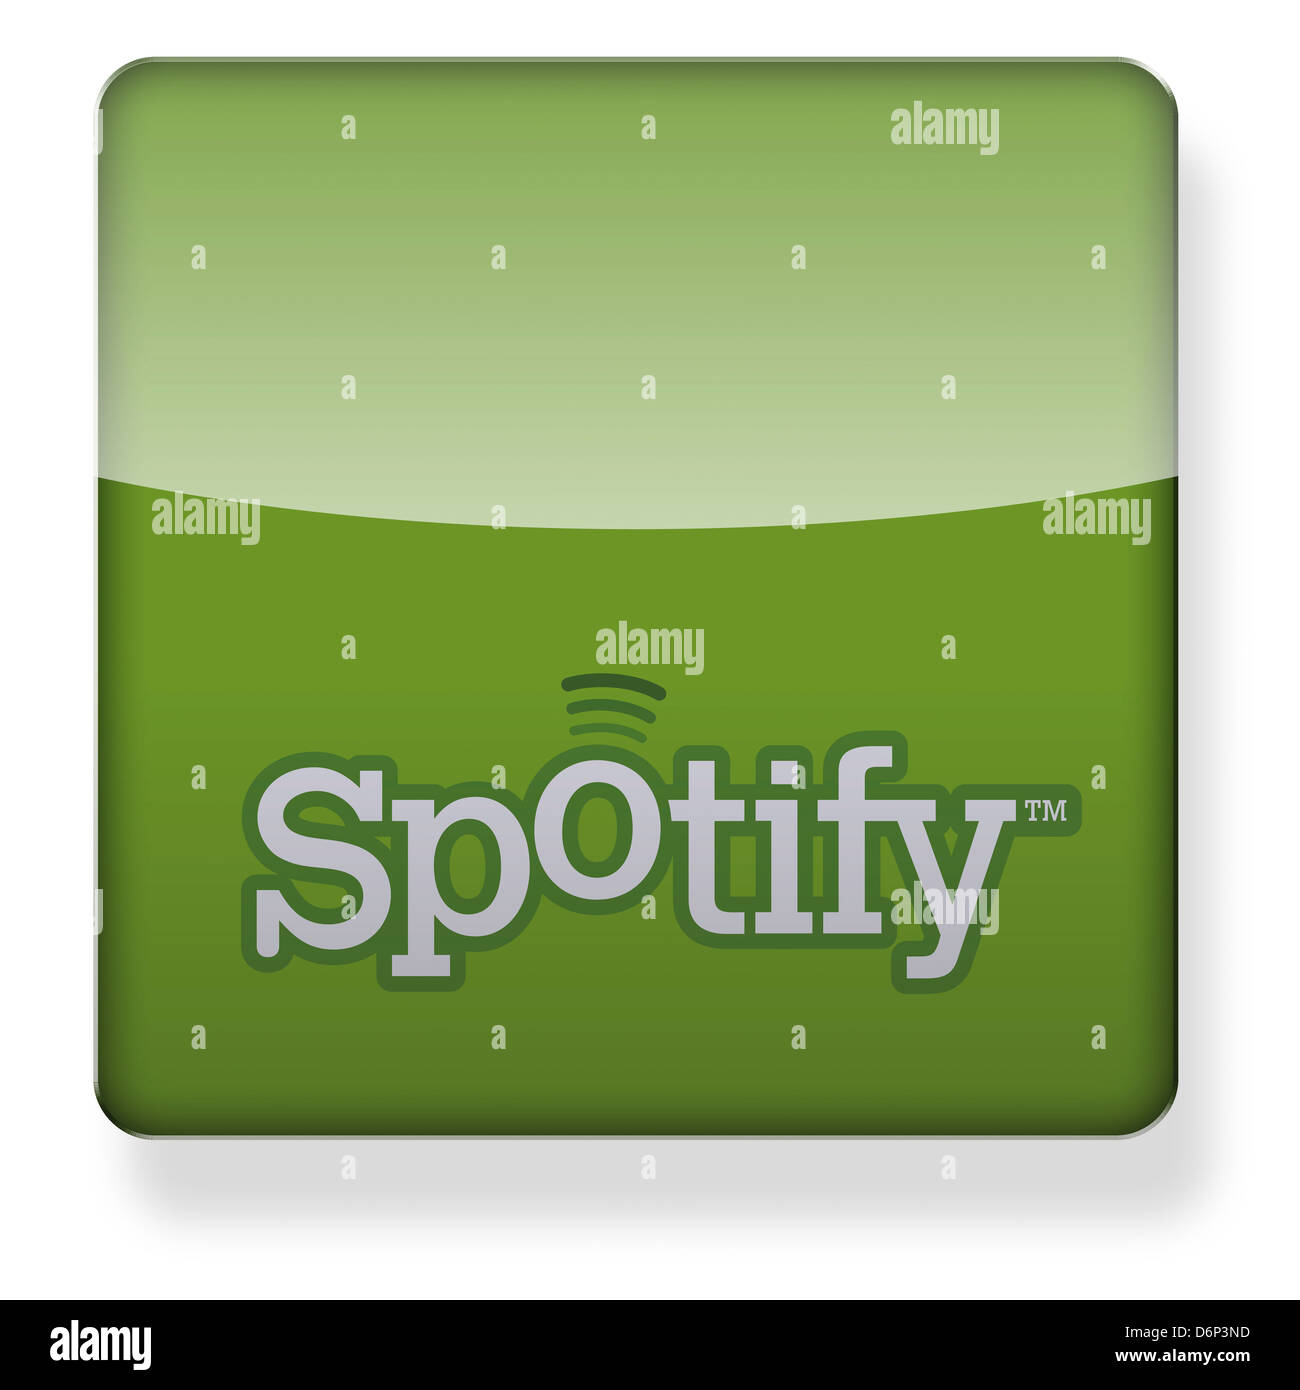 Spotify logo as an app icon. Clipping path included. Stock Photo